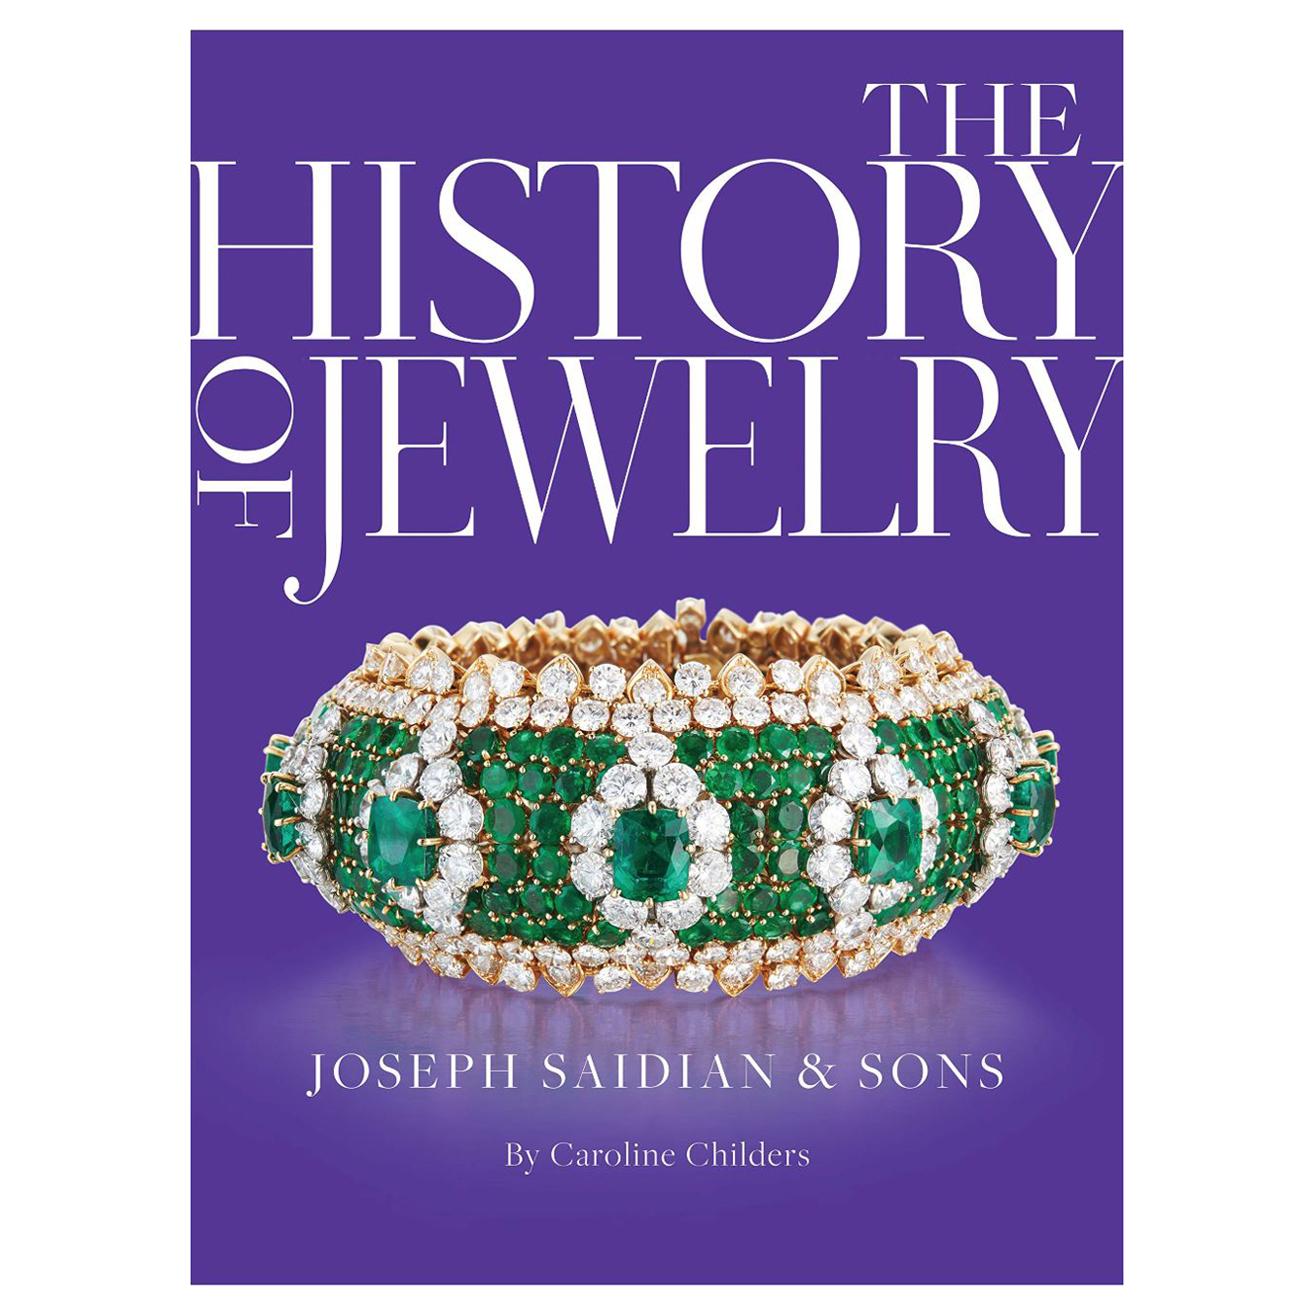 "The History of Jewelry" Joseph Saidian and Sons published by Rizzoli   